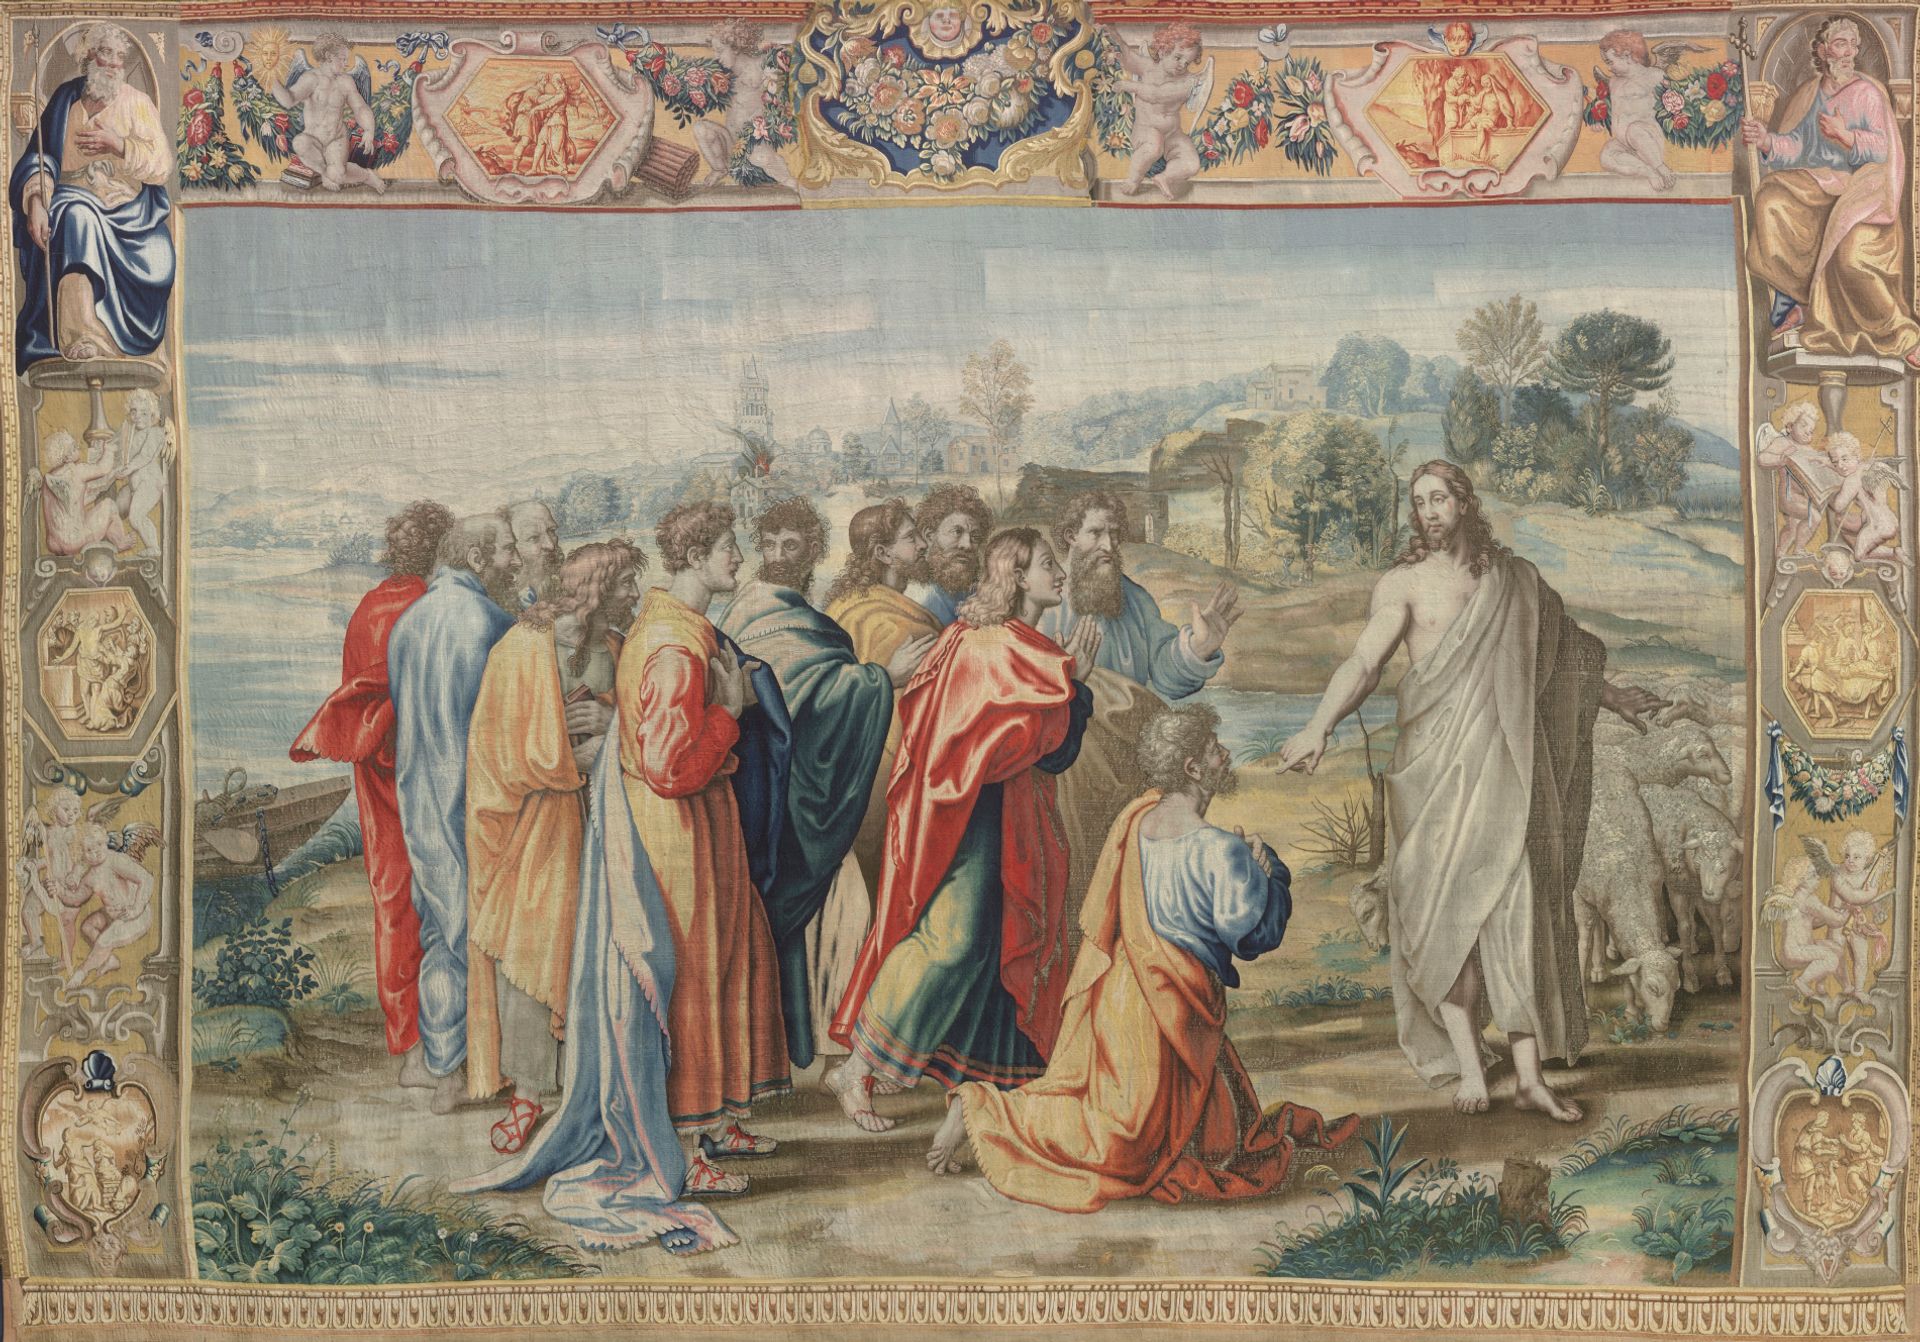 Mortlake Tapestry Manufactory after designs by Raphael, Feed My Sheep (Christ's Charge to Peter) (after 1625). Staatliche Kunstsammlungen Dresden, Gemäldegalerie Alte Meister.